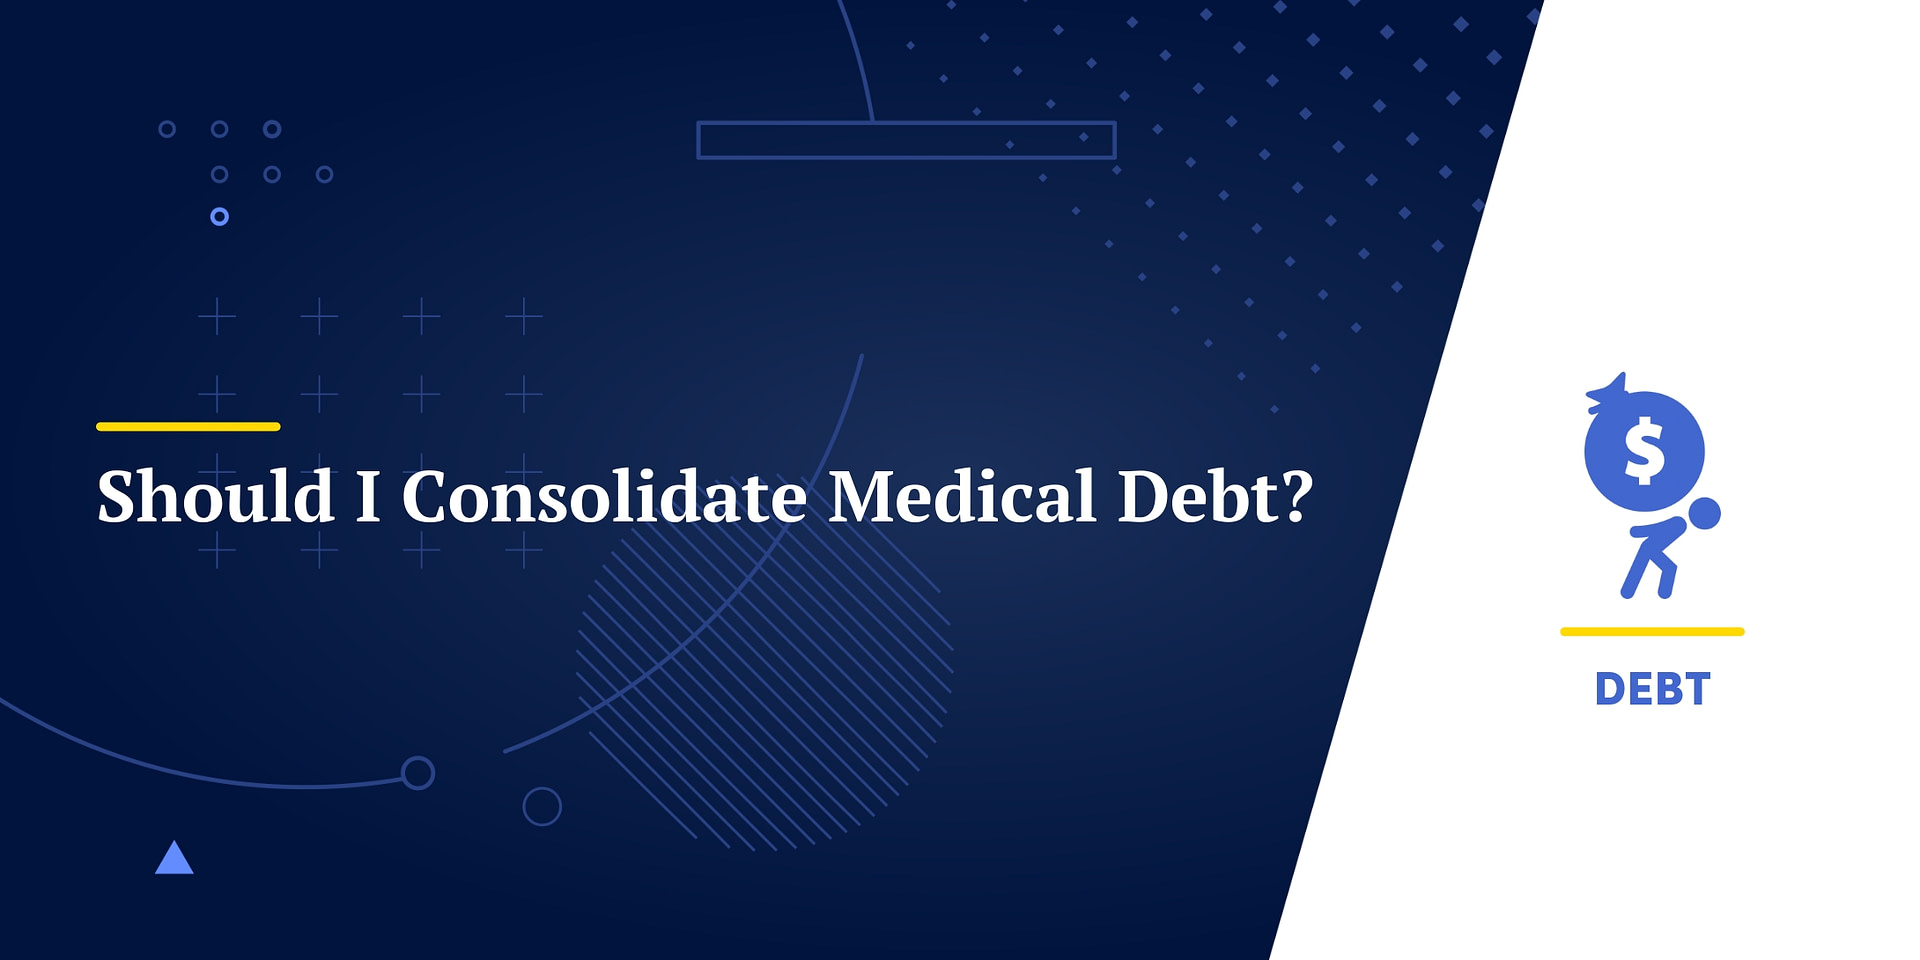 Ought to I Consolidate Medical Debt?